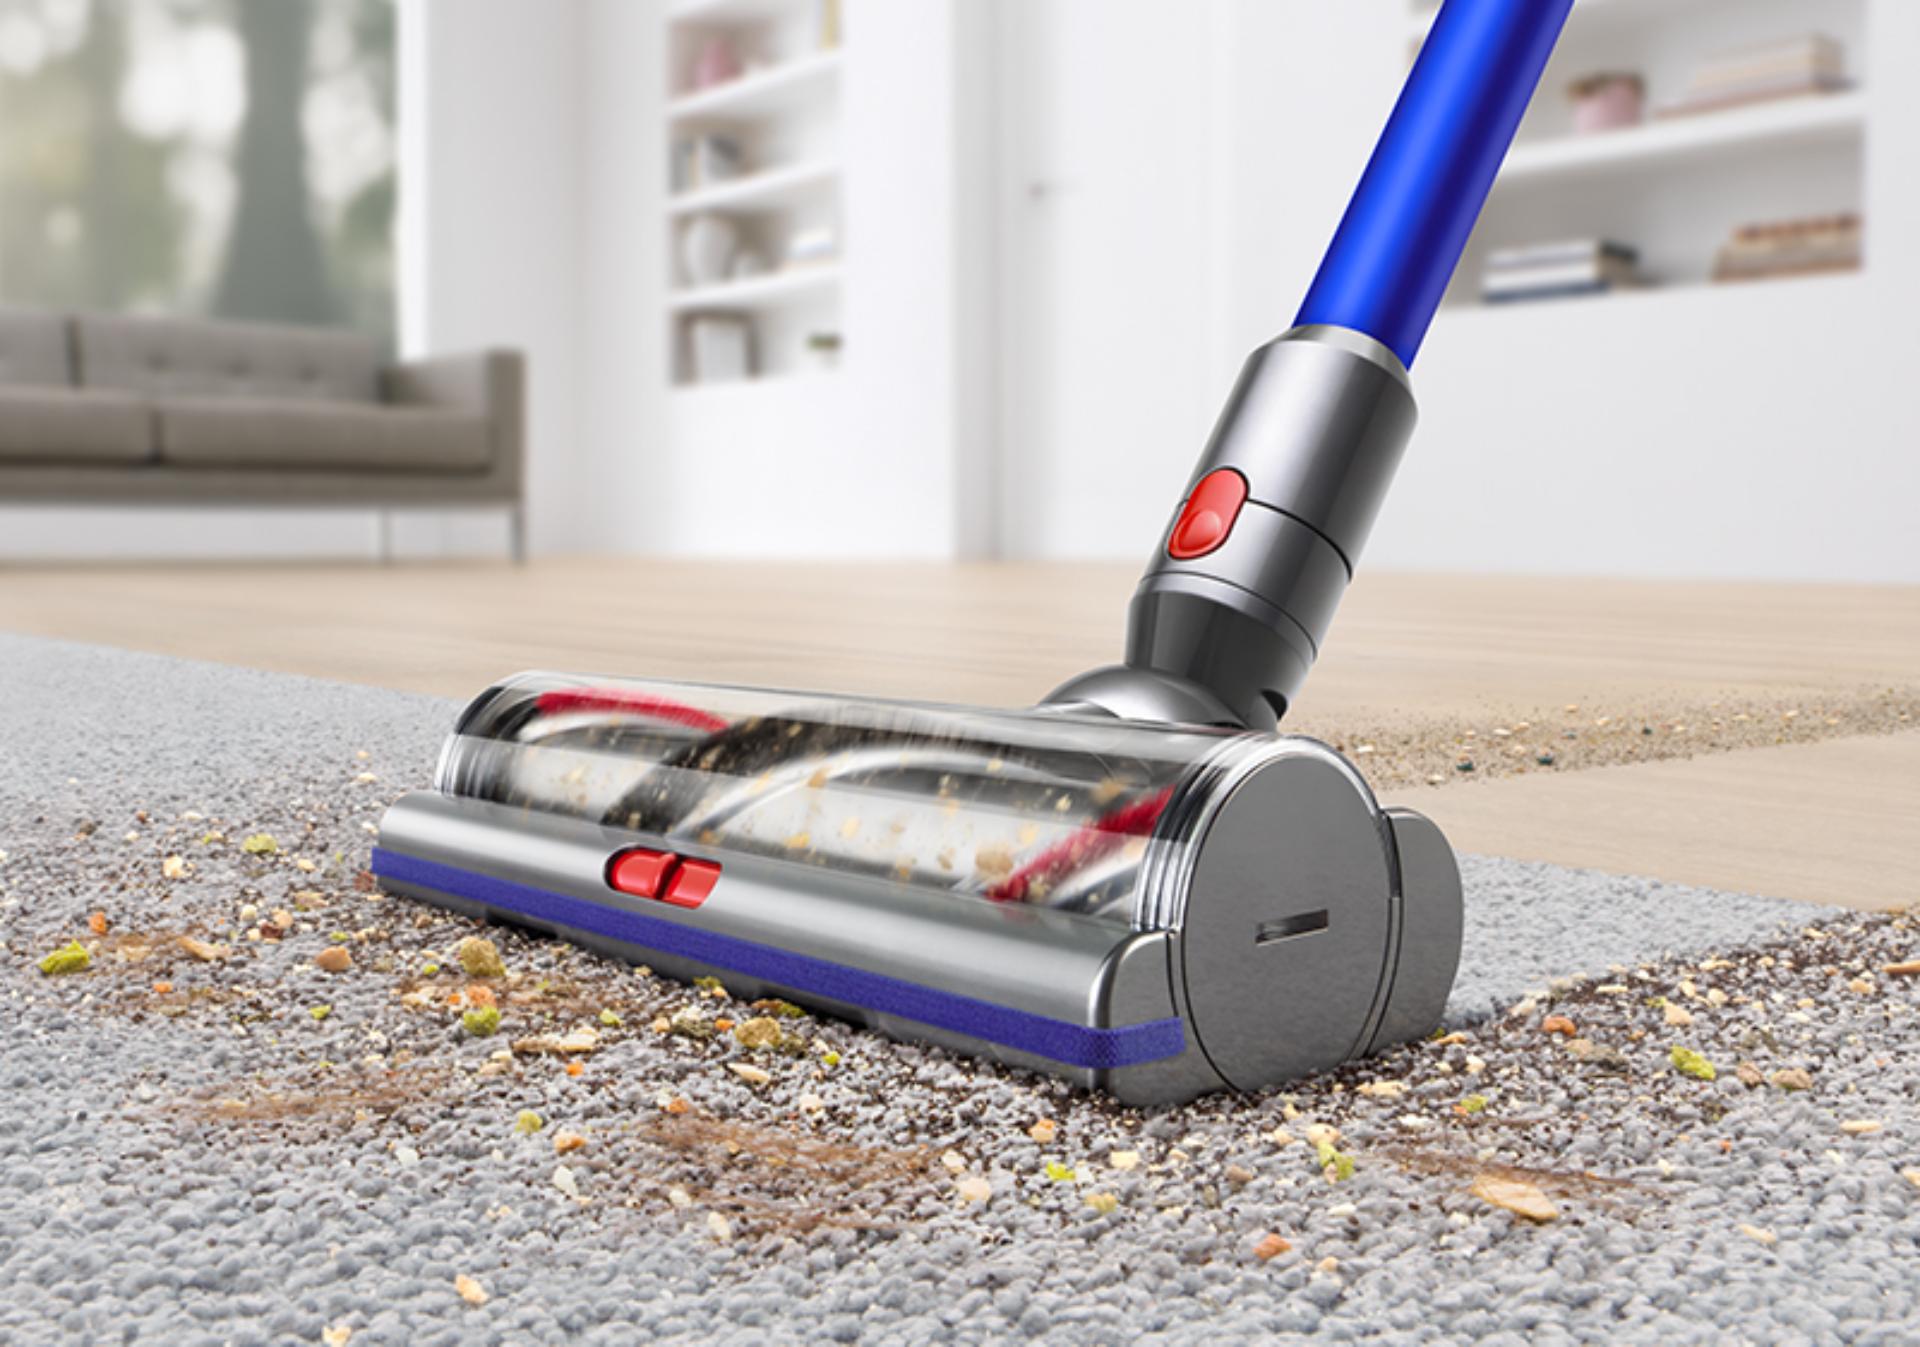 Dyson pet vacuum being used to clean a carpet